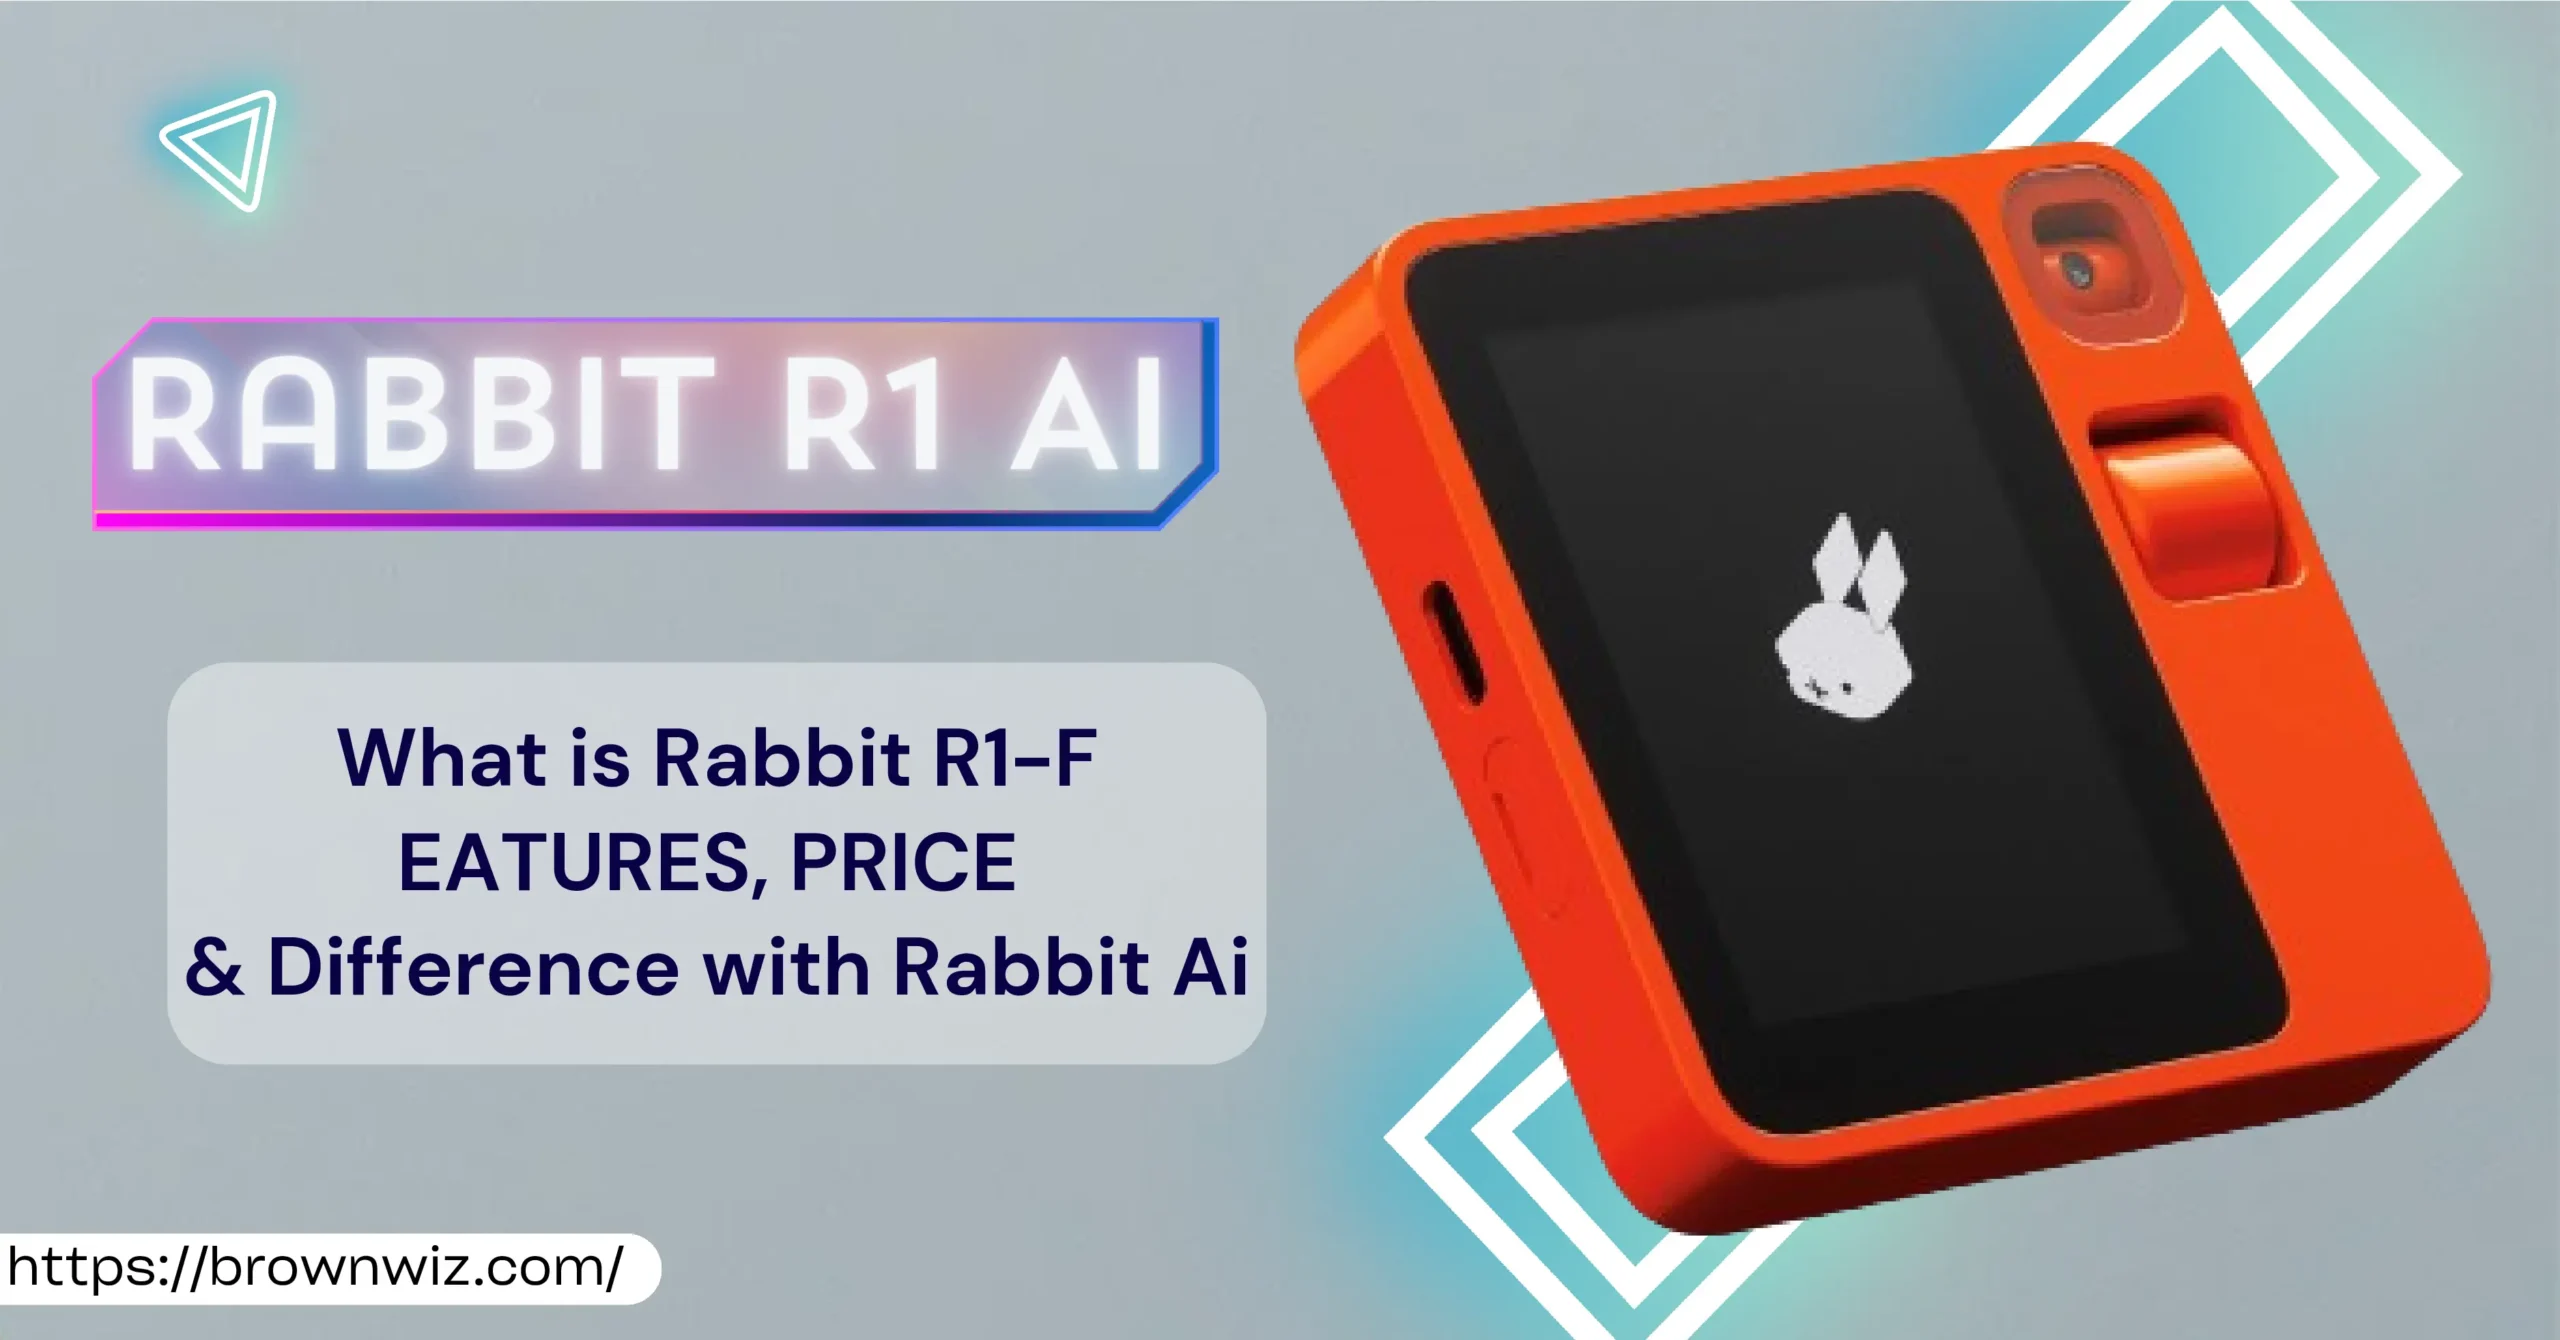 What is Rabbit R1-FEATURES, PRICE & Difference with Rabbit Ai